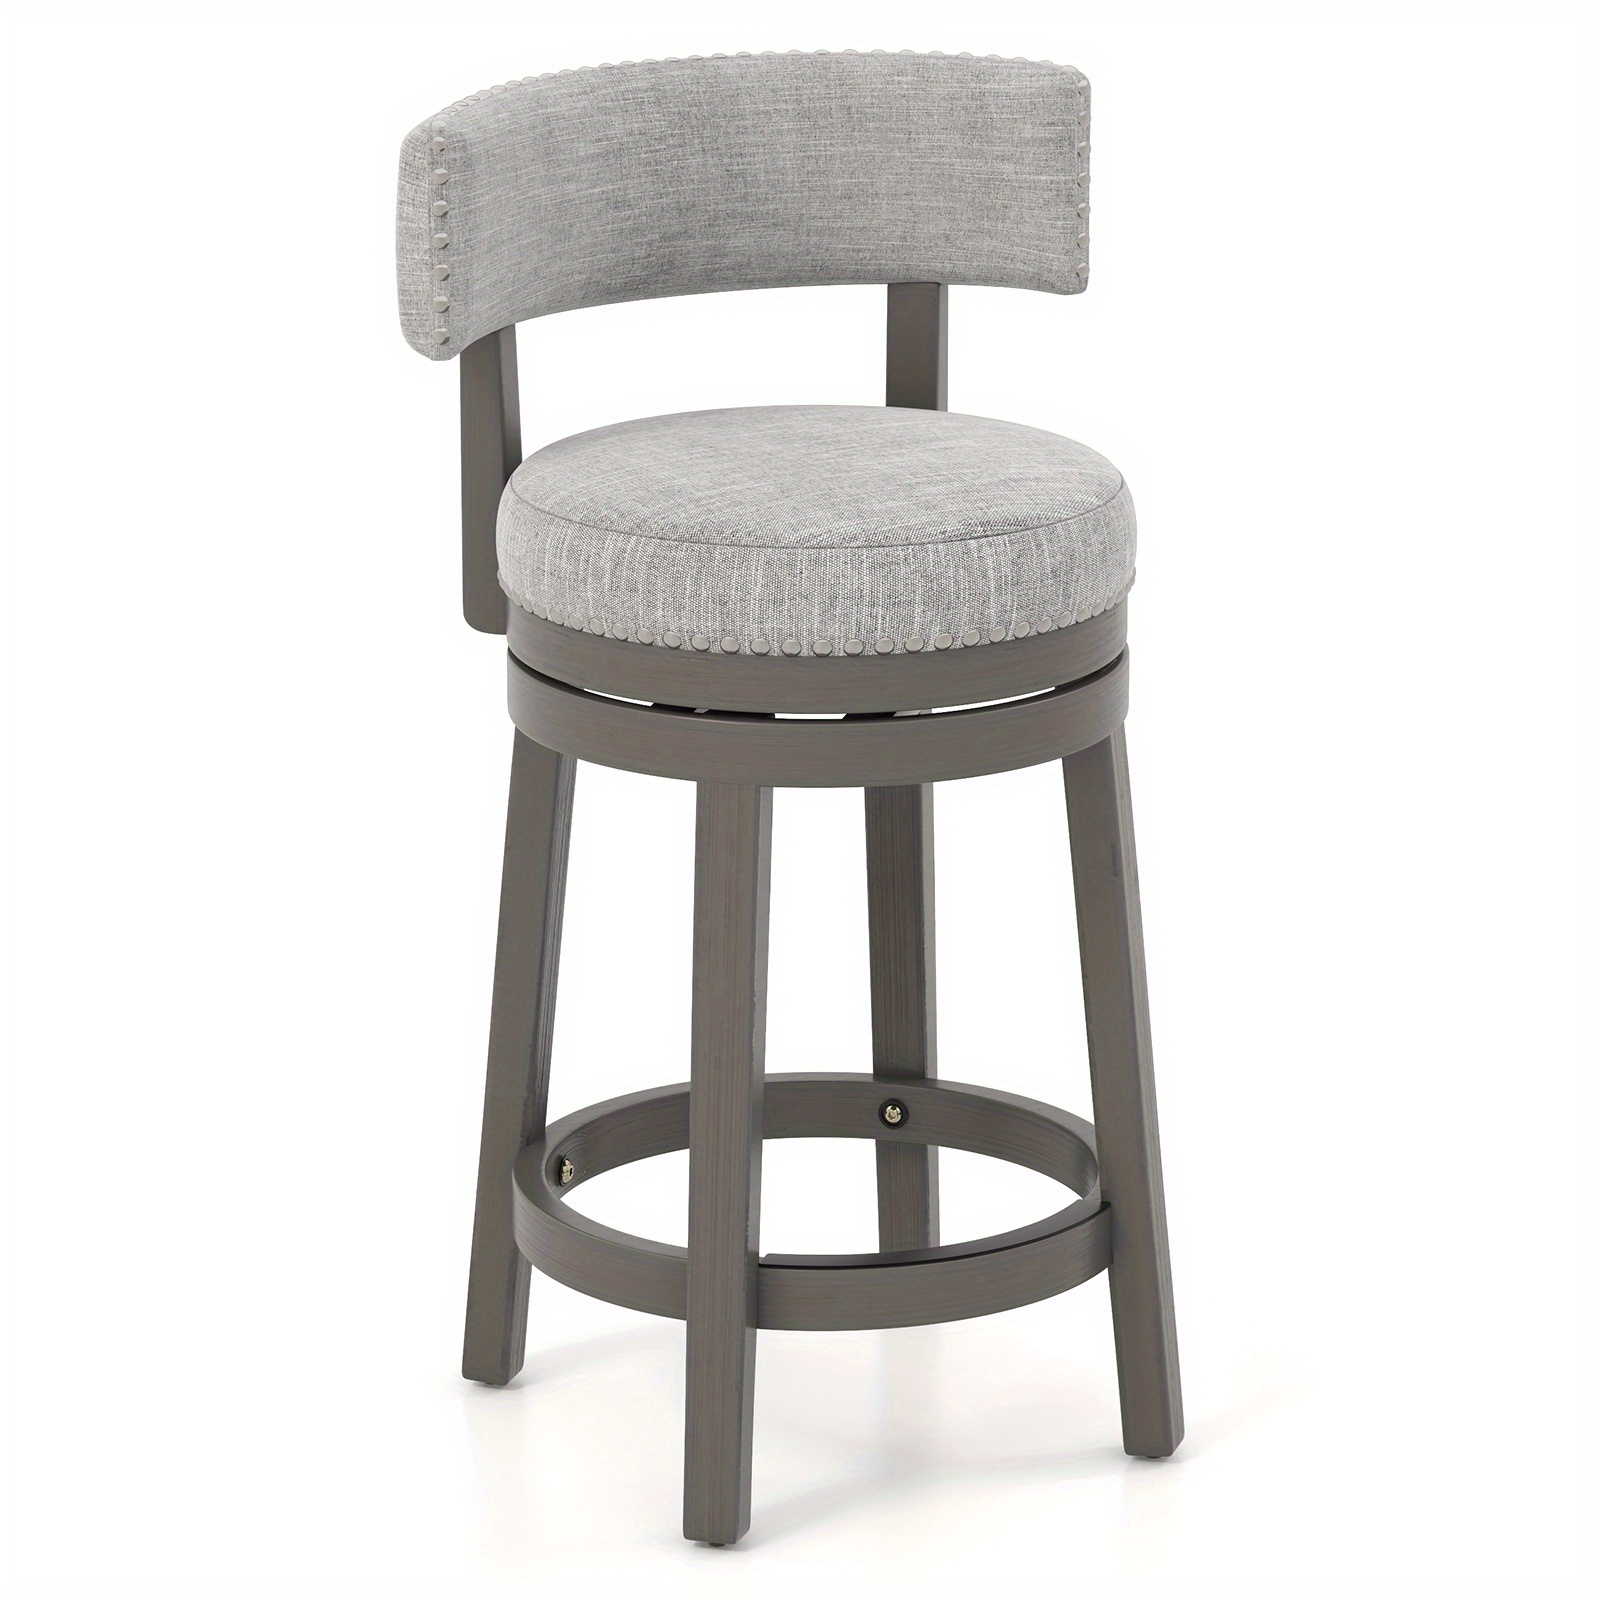 

Safstar 1 Pc Upholstered Swivel Bar Stool Wooden Counter Height Kitchen Chair W/ Back Grey